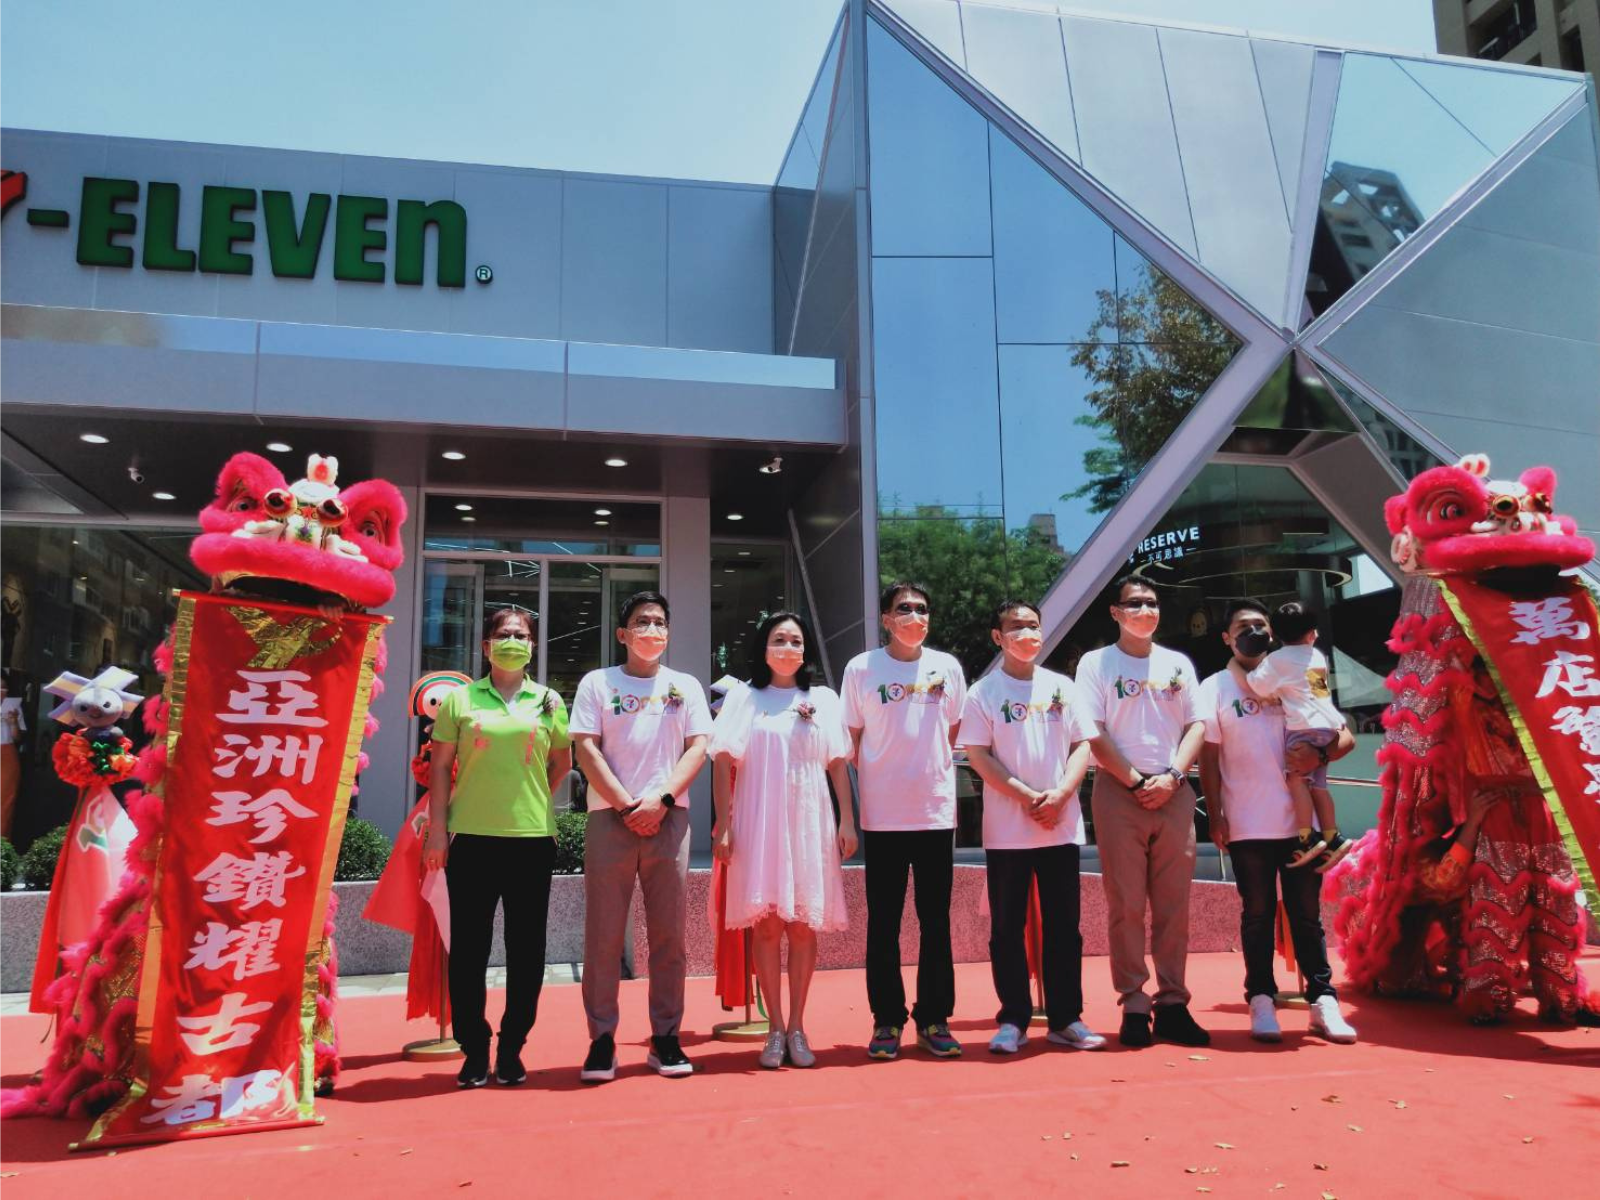 7-ELEVEN亞洲10000店璀璨登場，<span style='color:red'>羅智先</span>指對創辦人高清愿最大的紀念